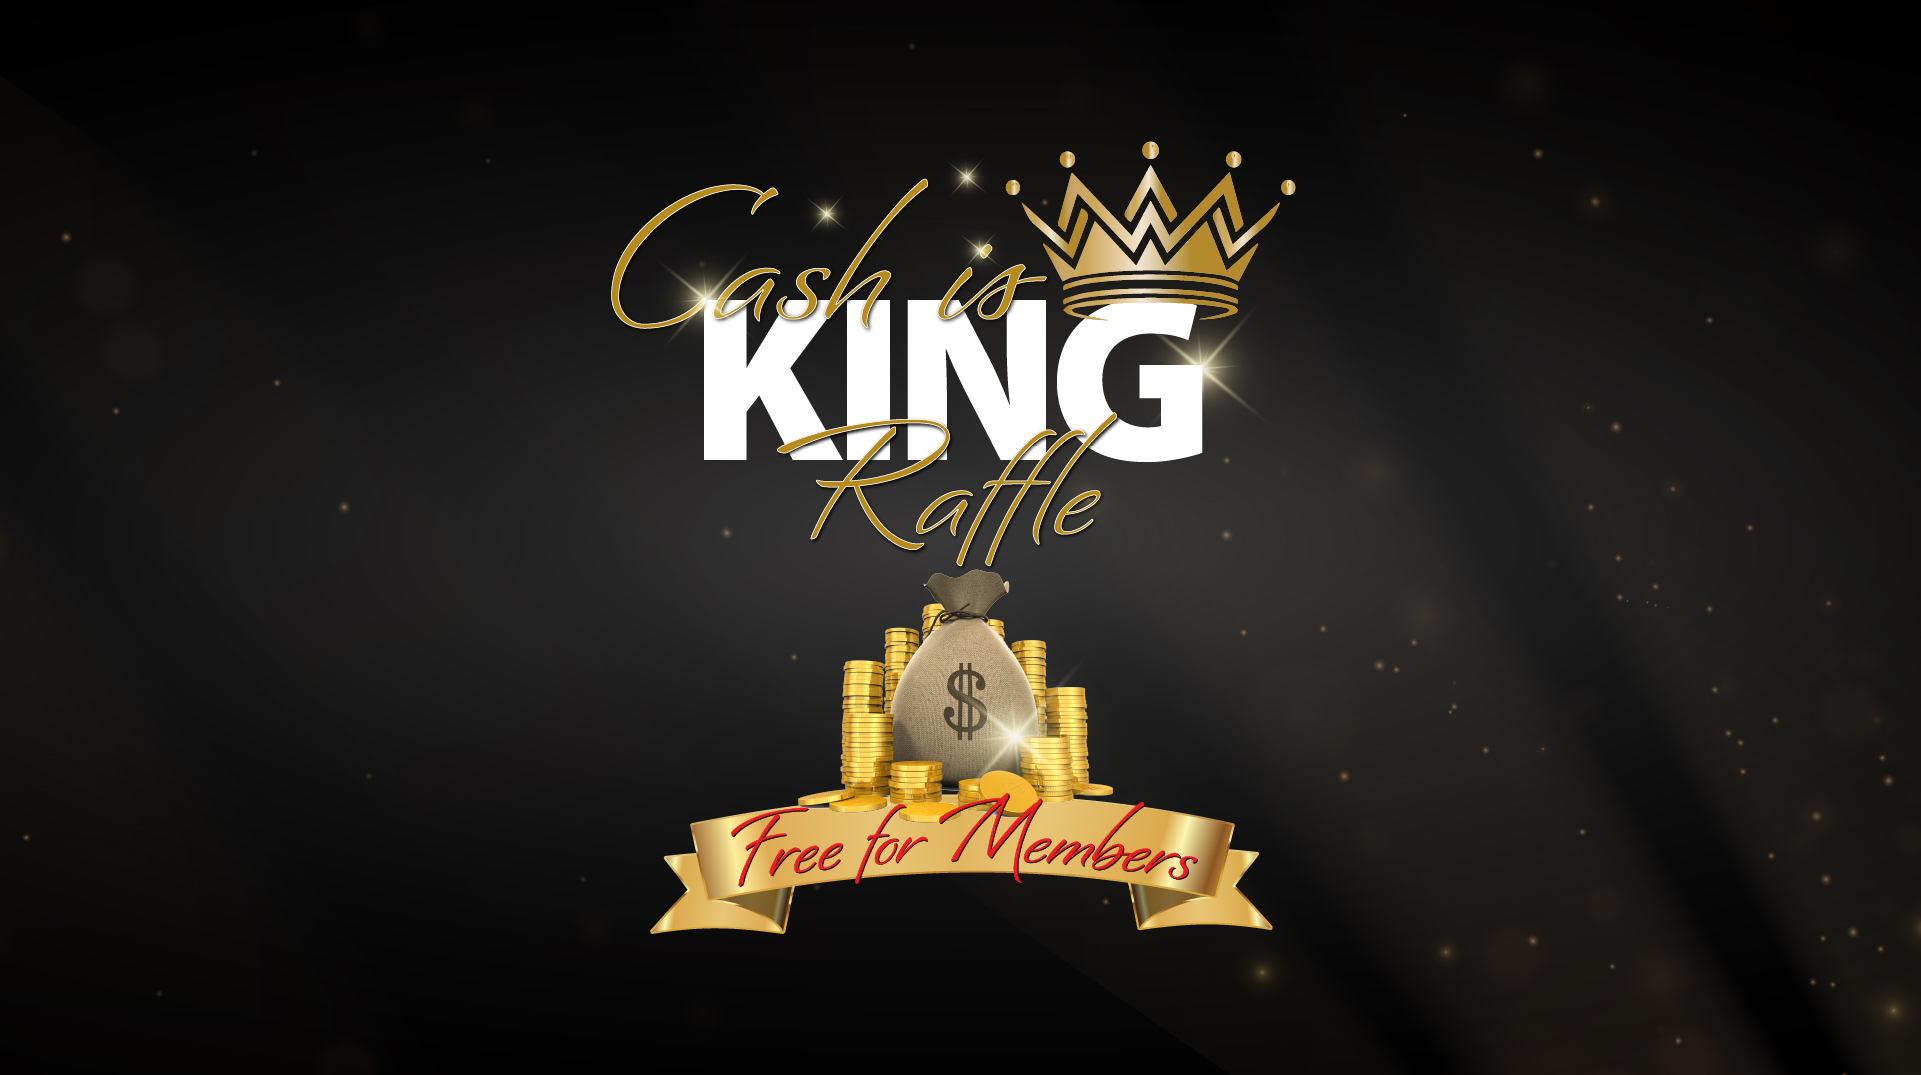 Cash Is King Free Raffle Every Friday SS&A